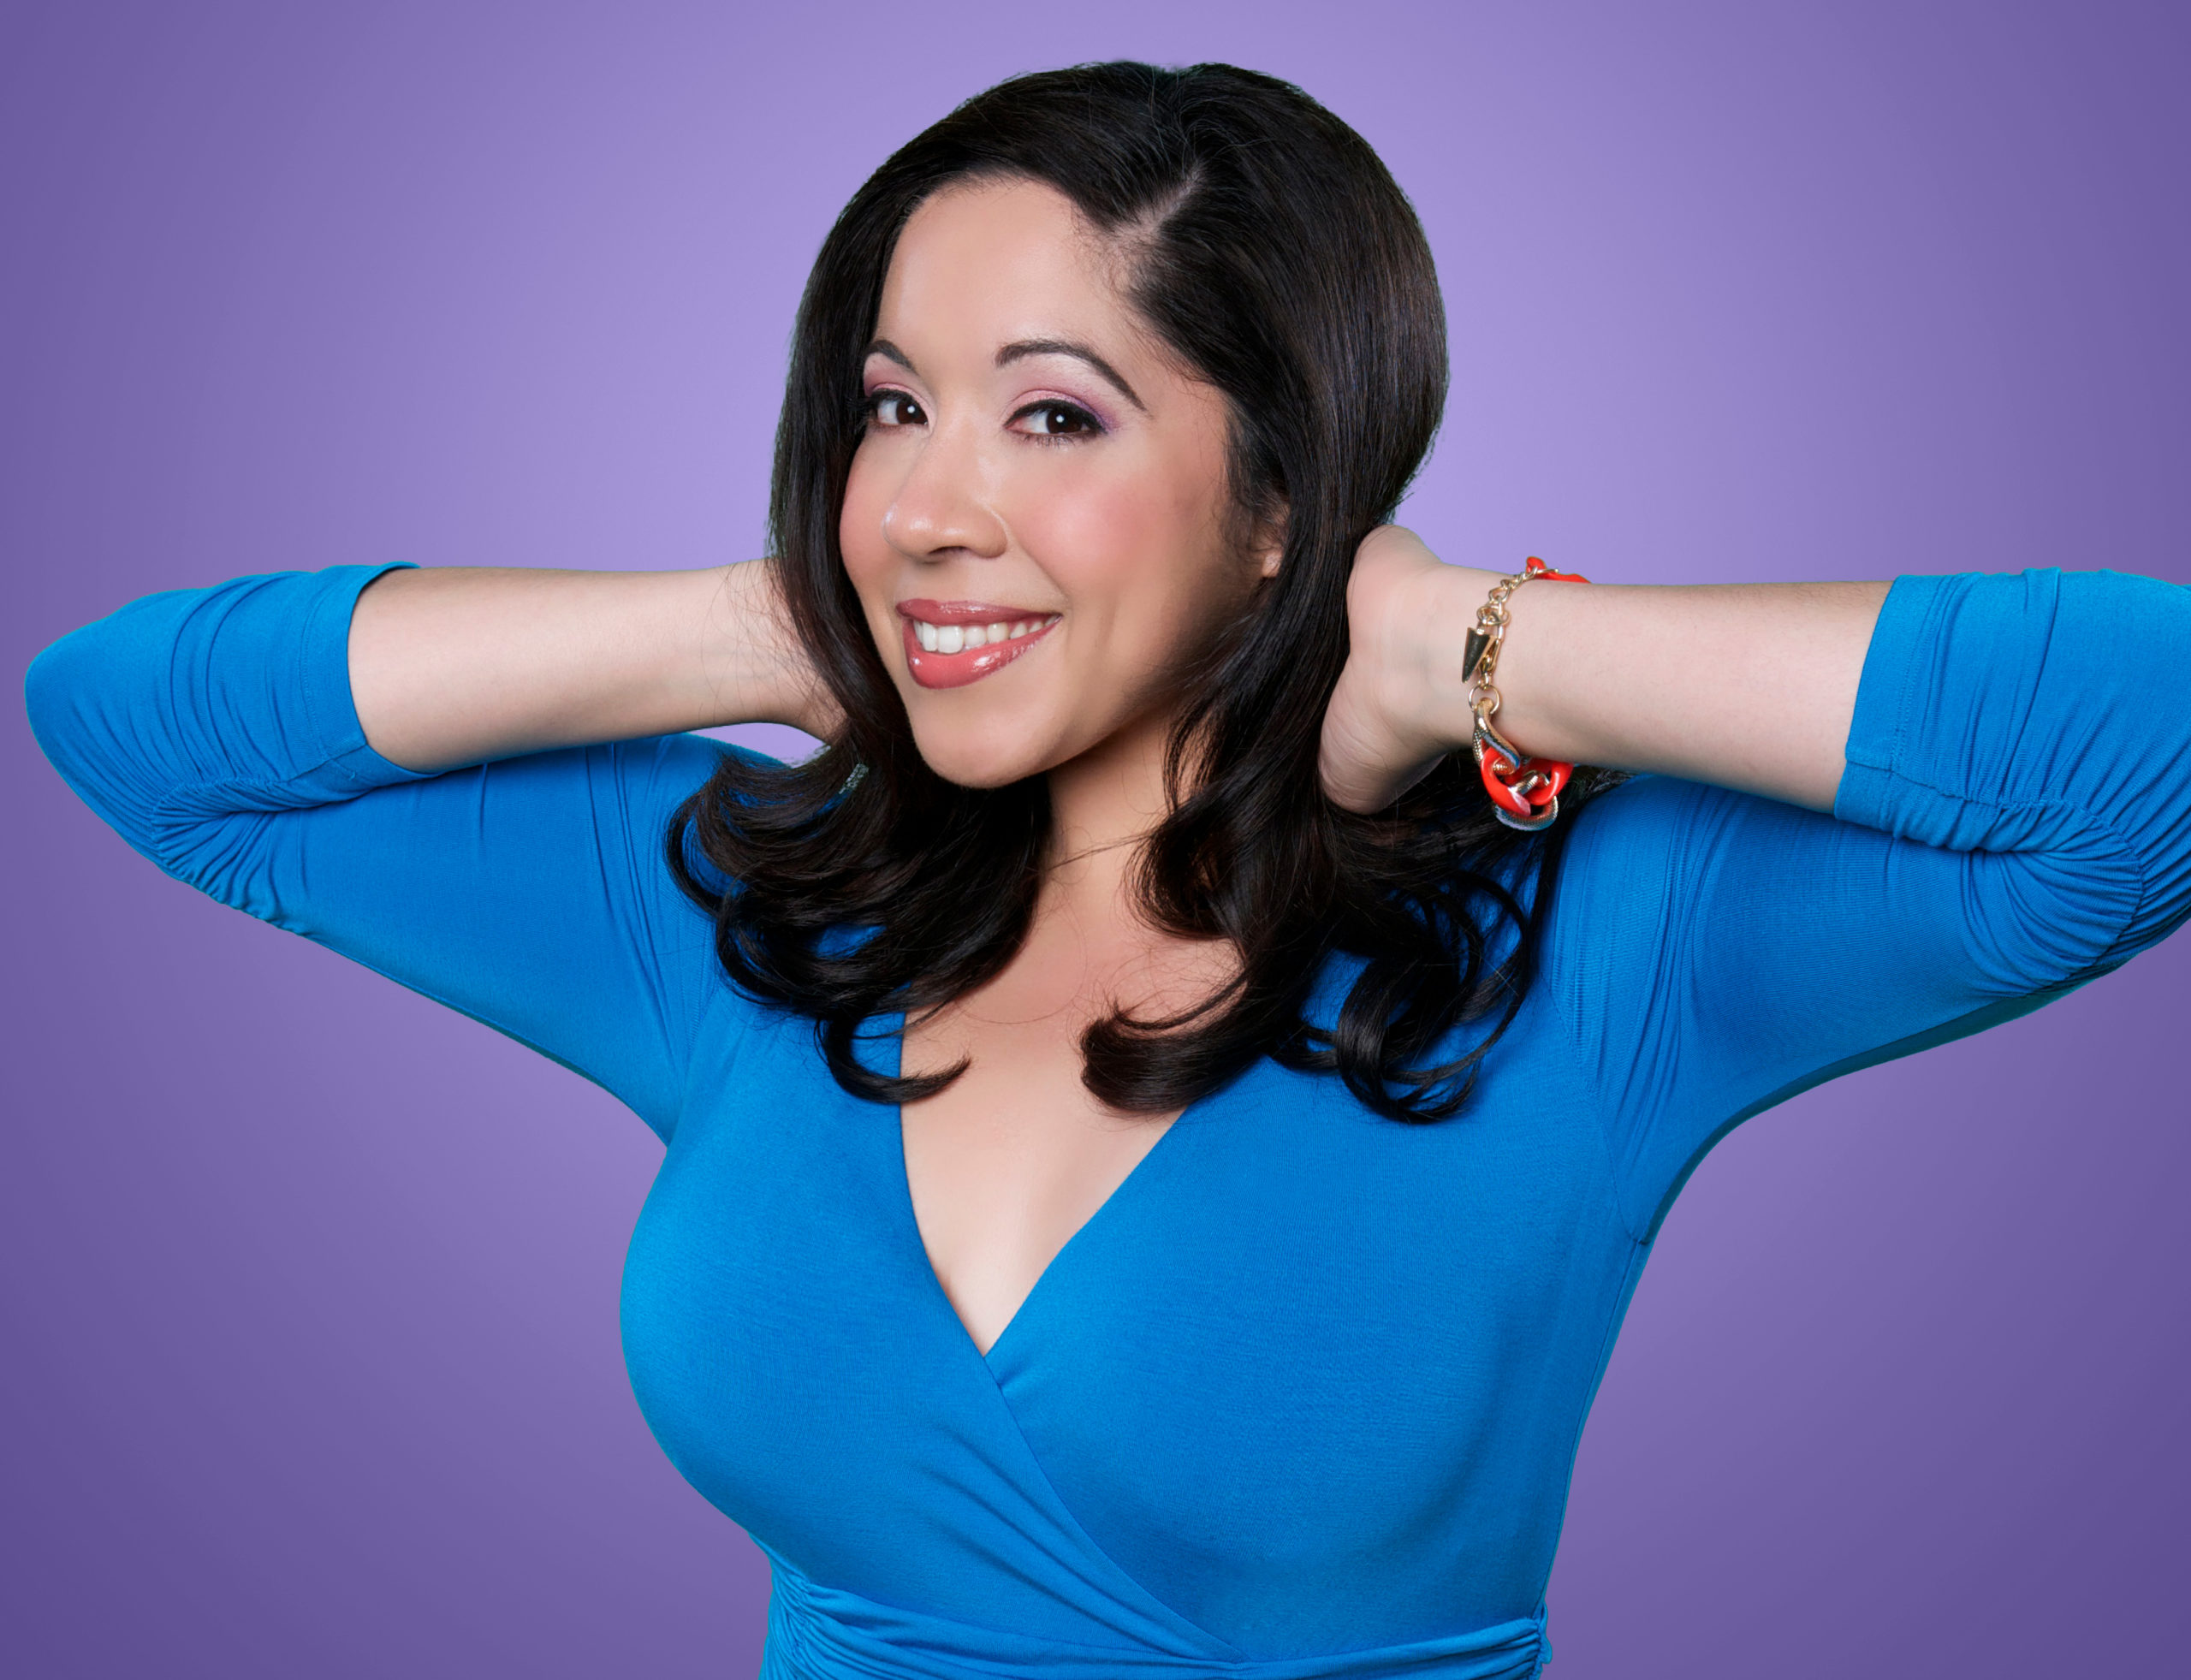 Actress, comedian, and writer Gina Brillon has made appearances on Comedy C...